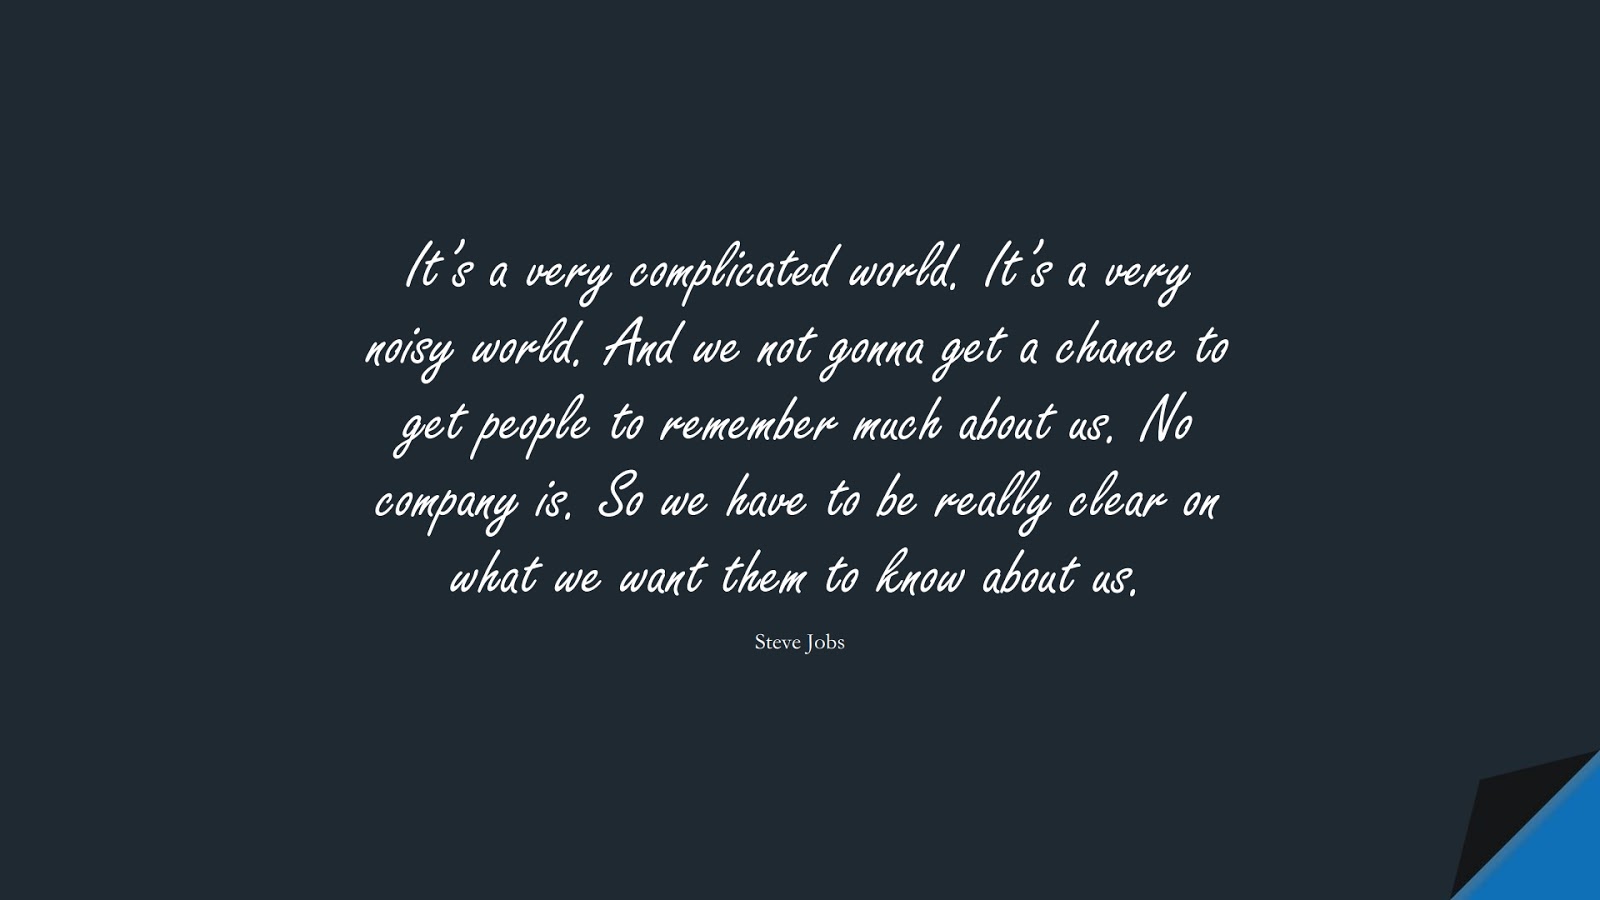 It’s a very complicated world. It’s a very noisy world. And we not gonna get a chance to get people to remember much about us. No company is. So we have to be really clear on what we want them to know about us. (Steve Jobs);  #SteveJobsQuotes